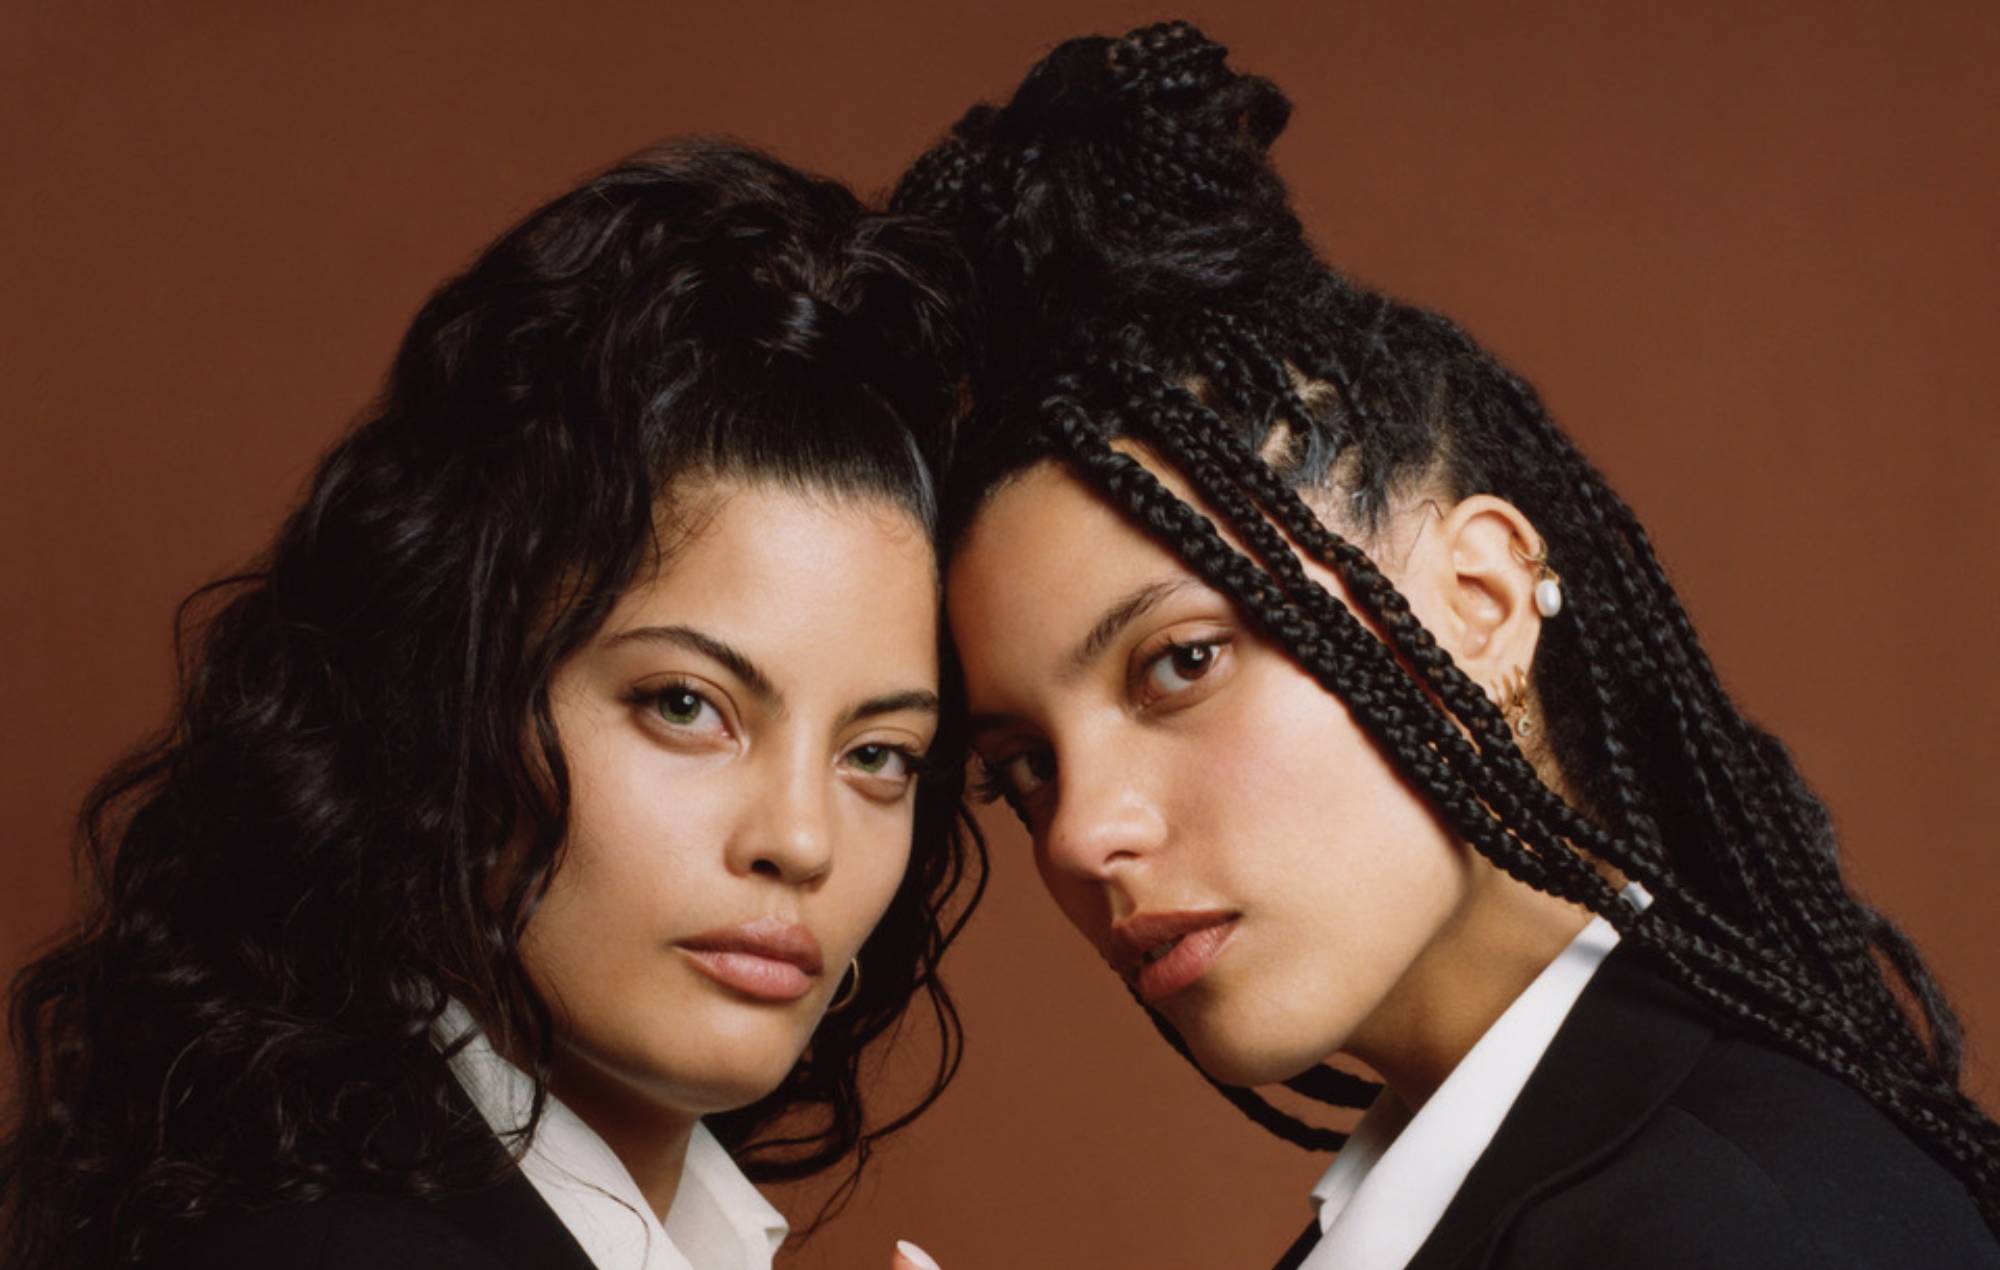 Five things we learned from our In Conversation video chat with Ibeyi